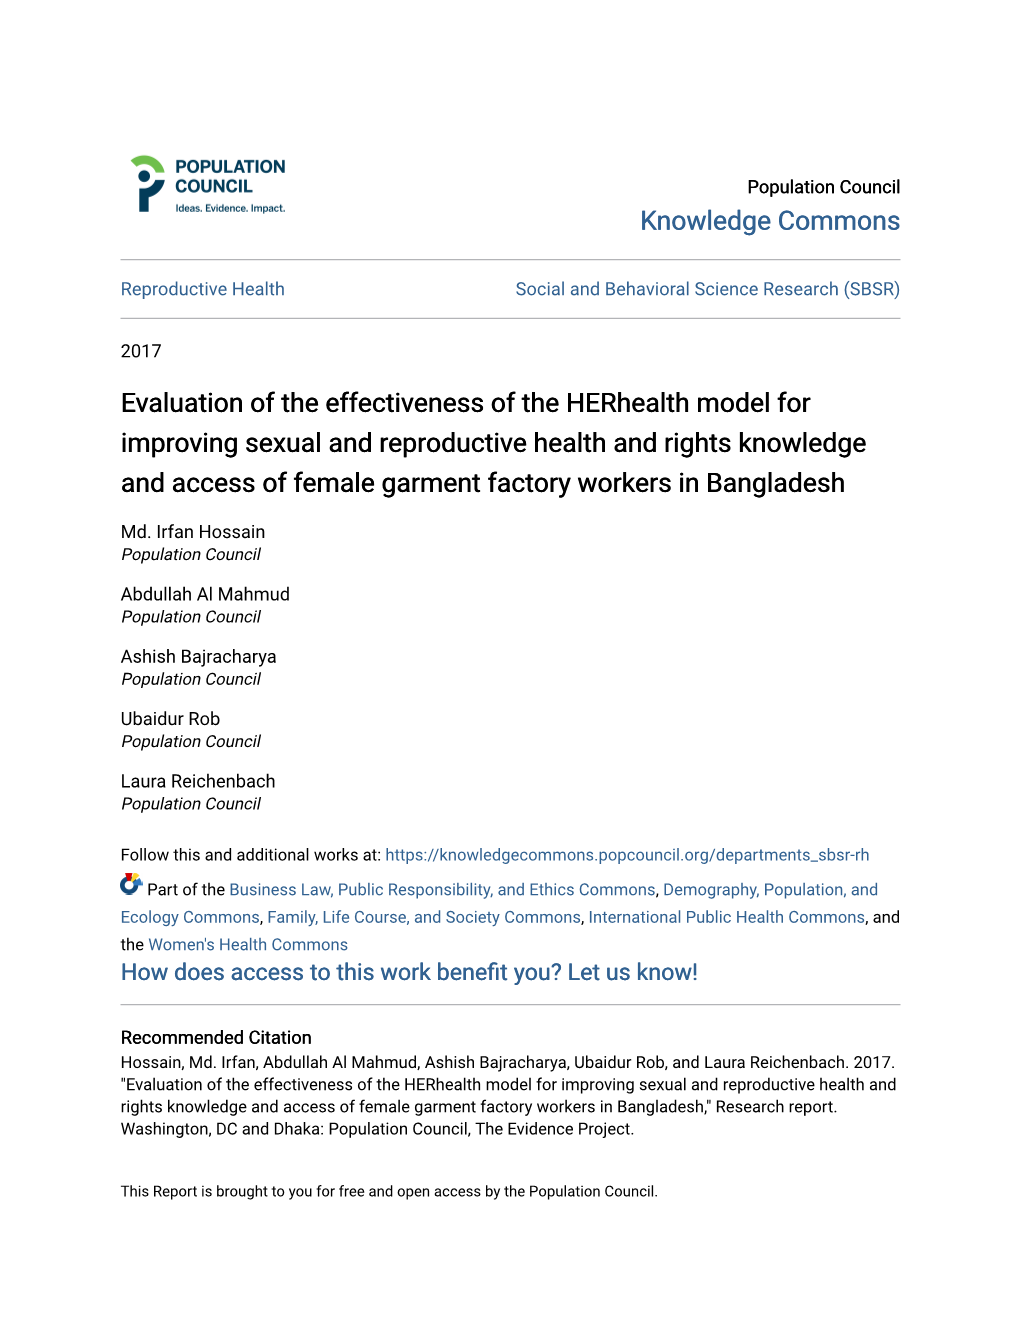 Evaluation of the Effectiveness of the Herhealth Model for Improving